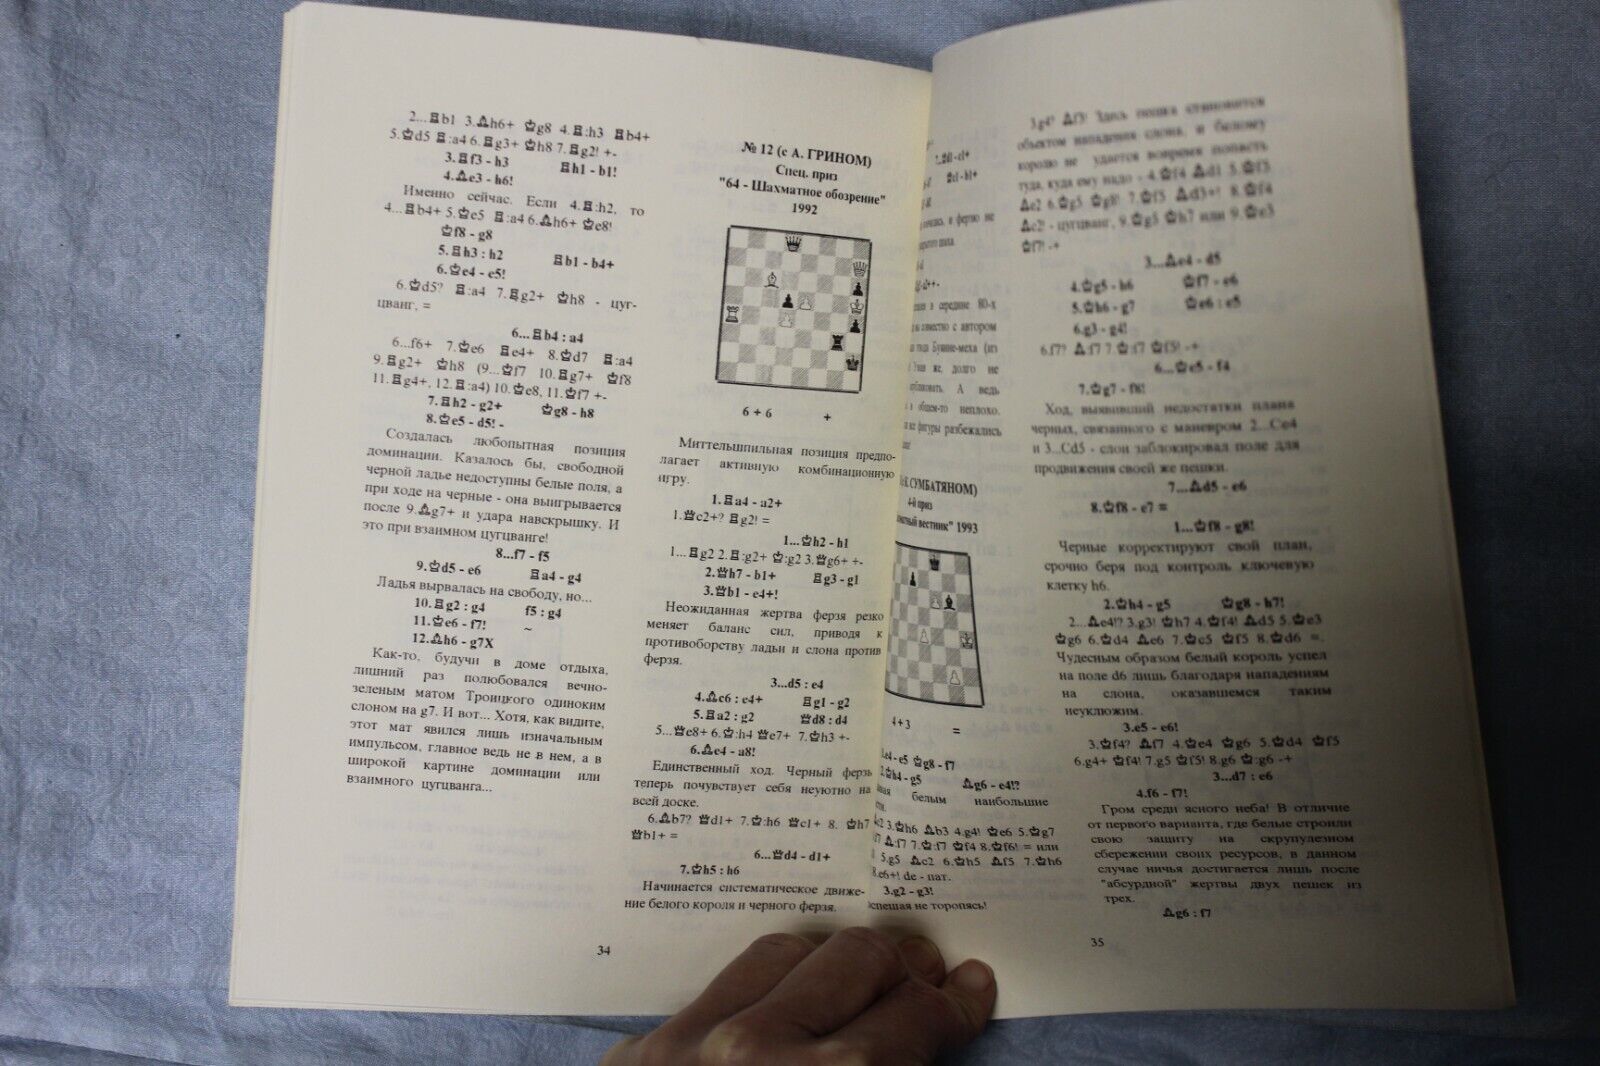 11075.Chess Book: Gusev - 50, International Competition for composing, 1994 -1996